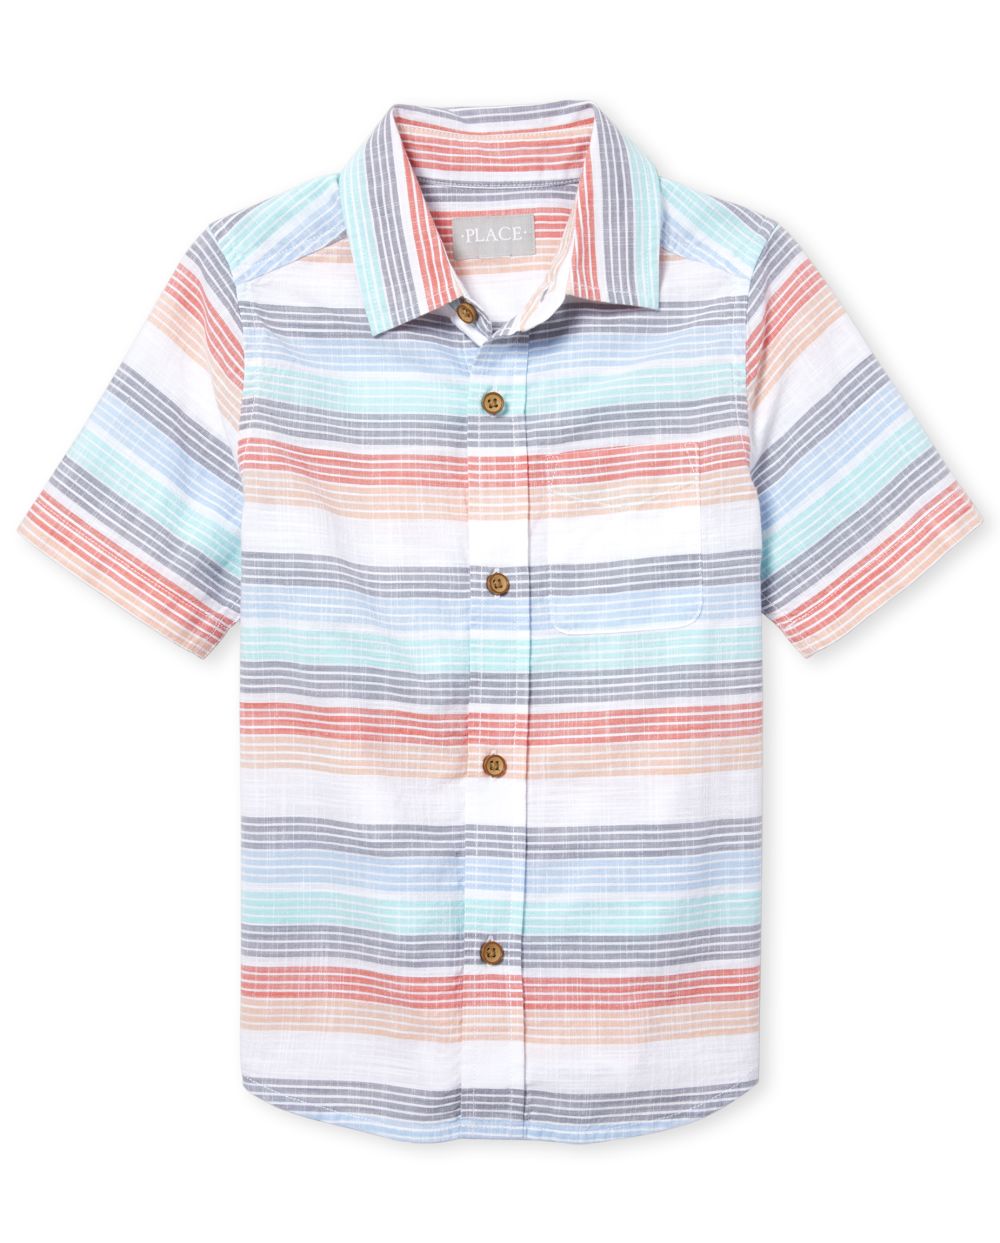 Boys Dad And Me Short Sleeve Striped Matching Chambray Button Down Shirt